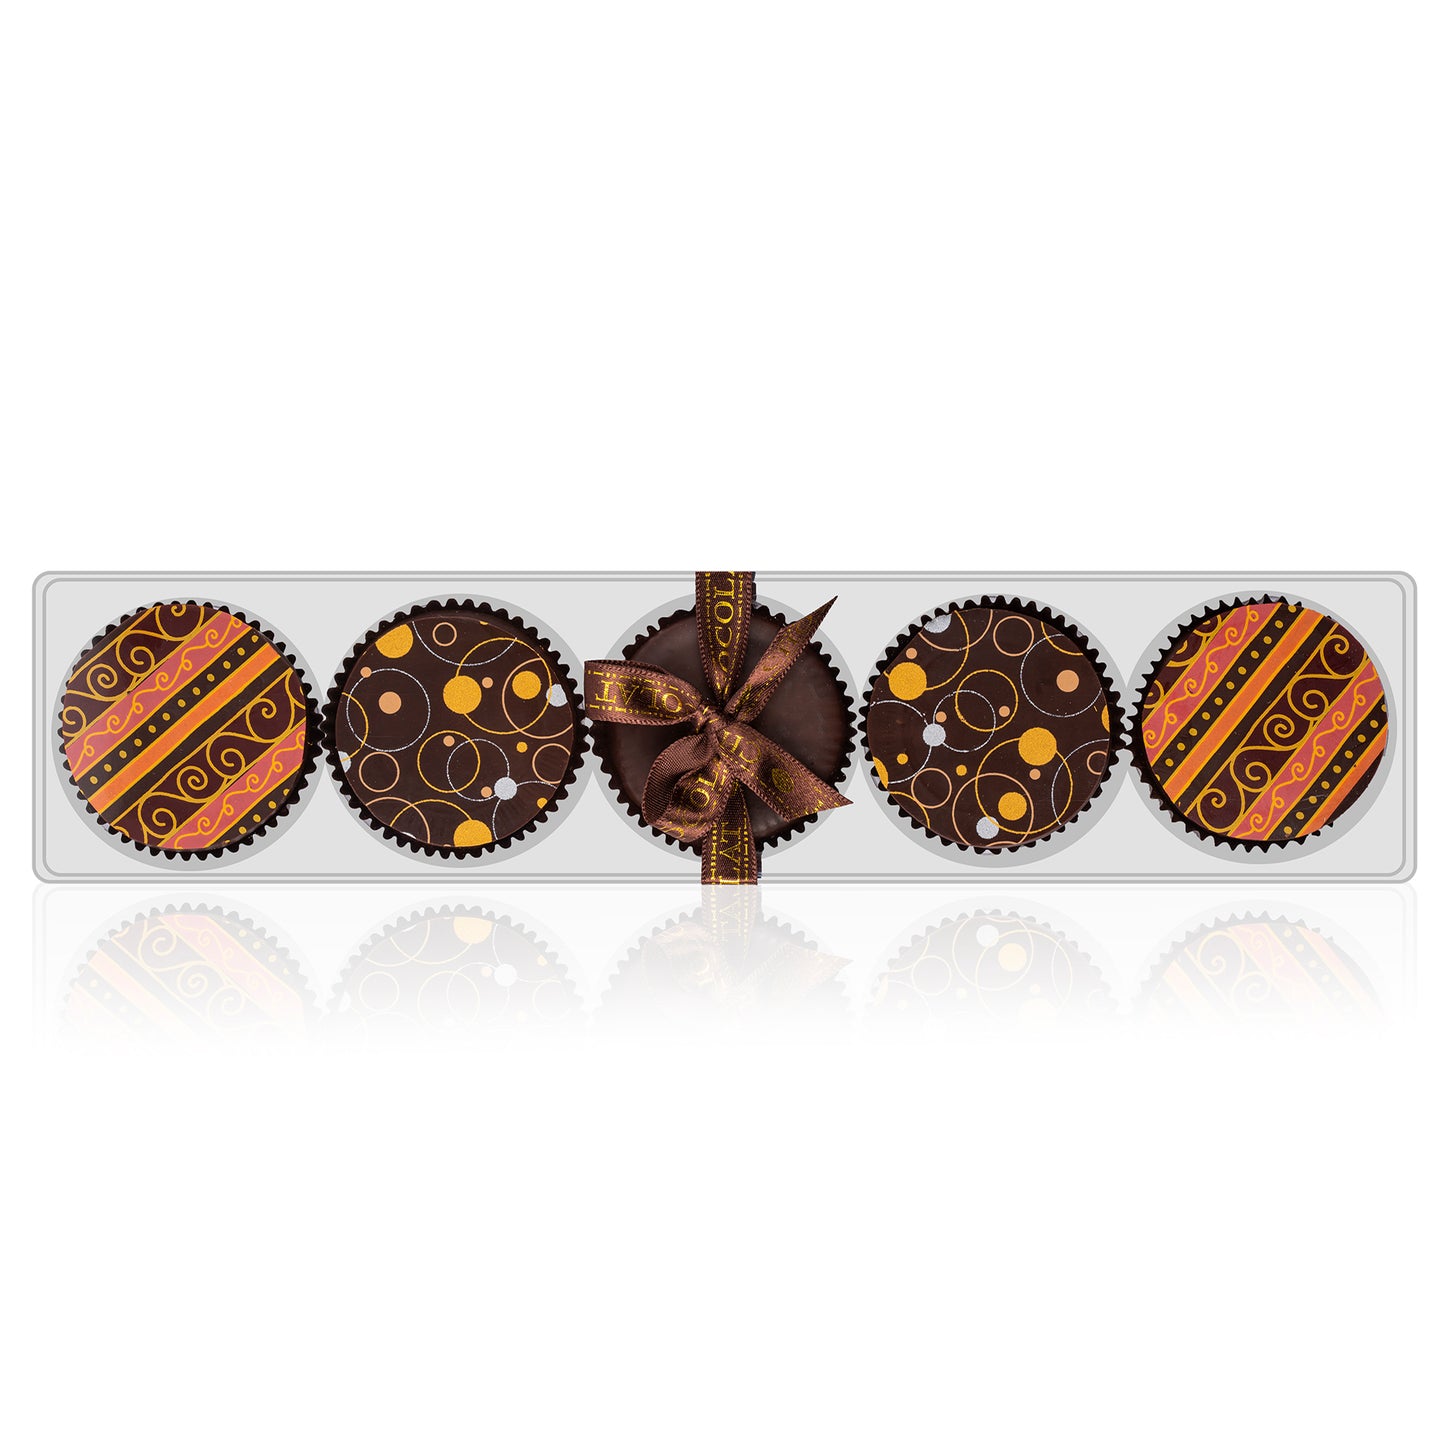 Chocolate Covered Sandwich Cookies (Oreo's) - Choose Variety Inside